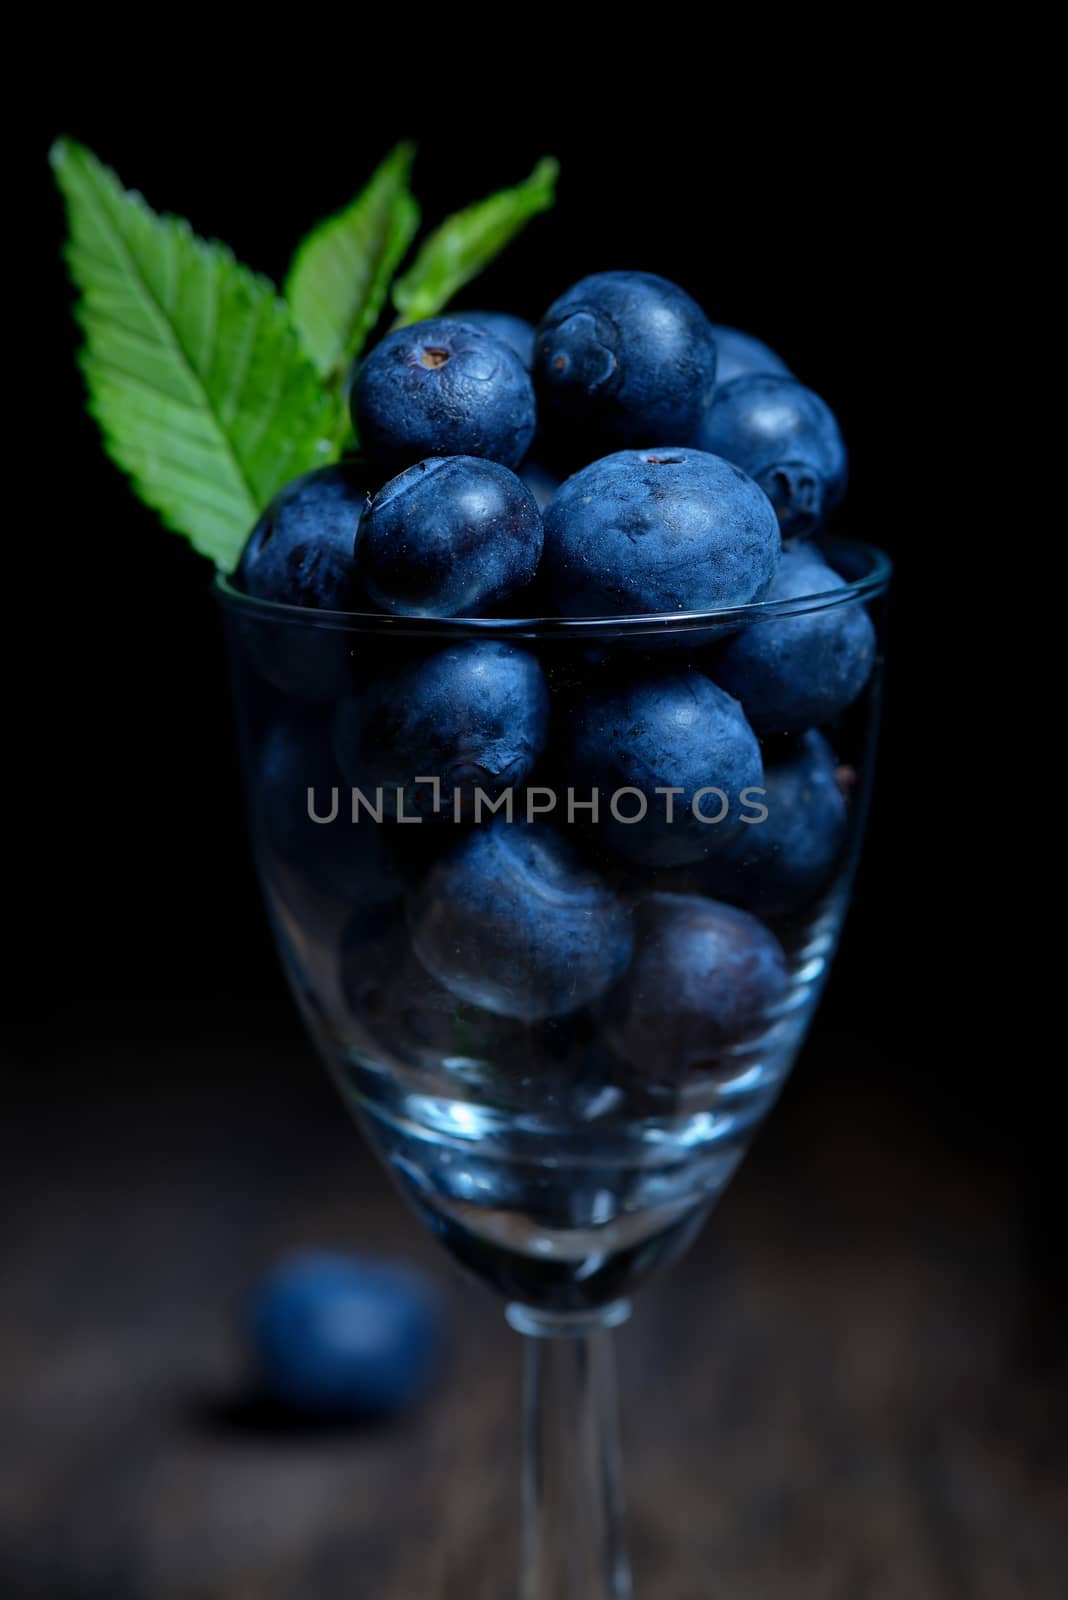 Blueberries in small glass by jordachelr